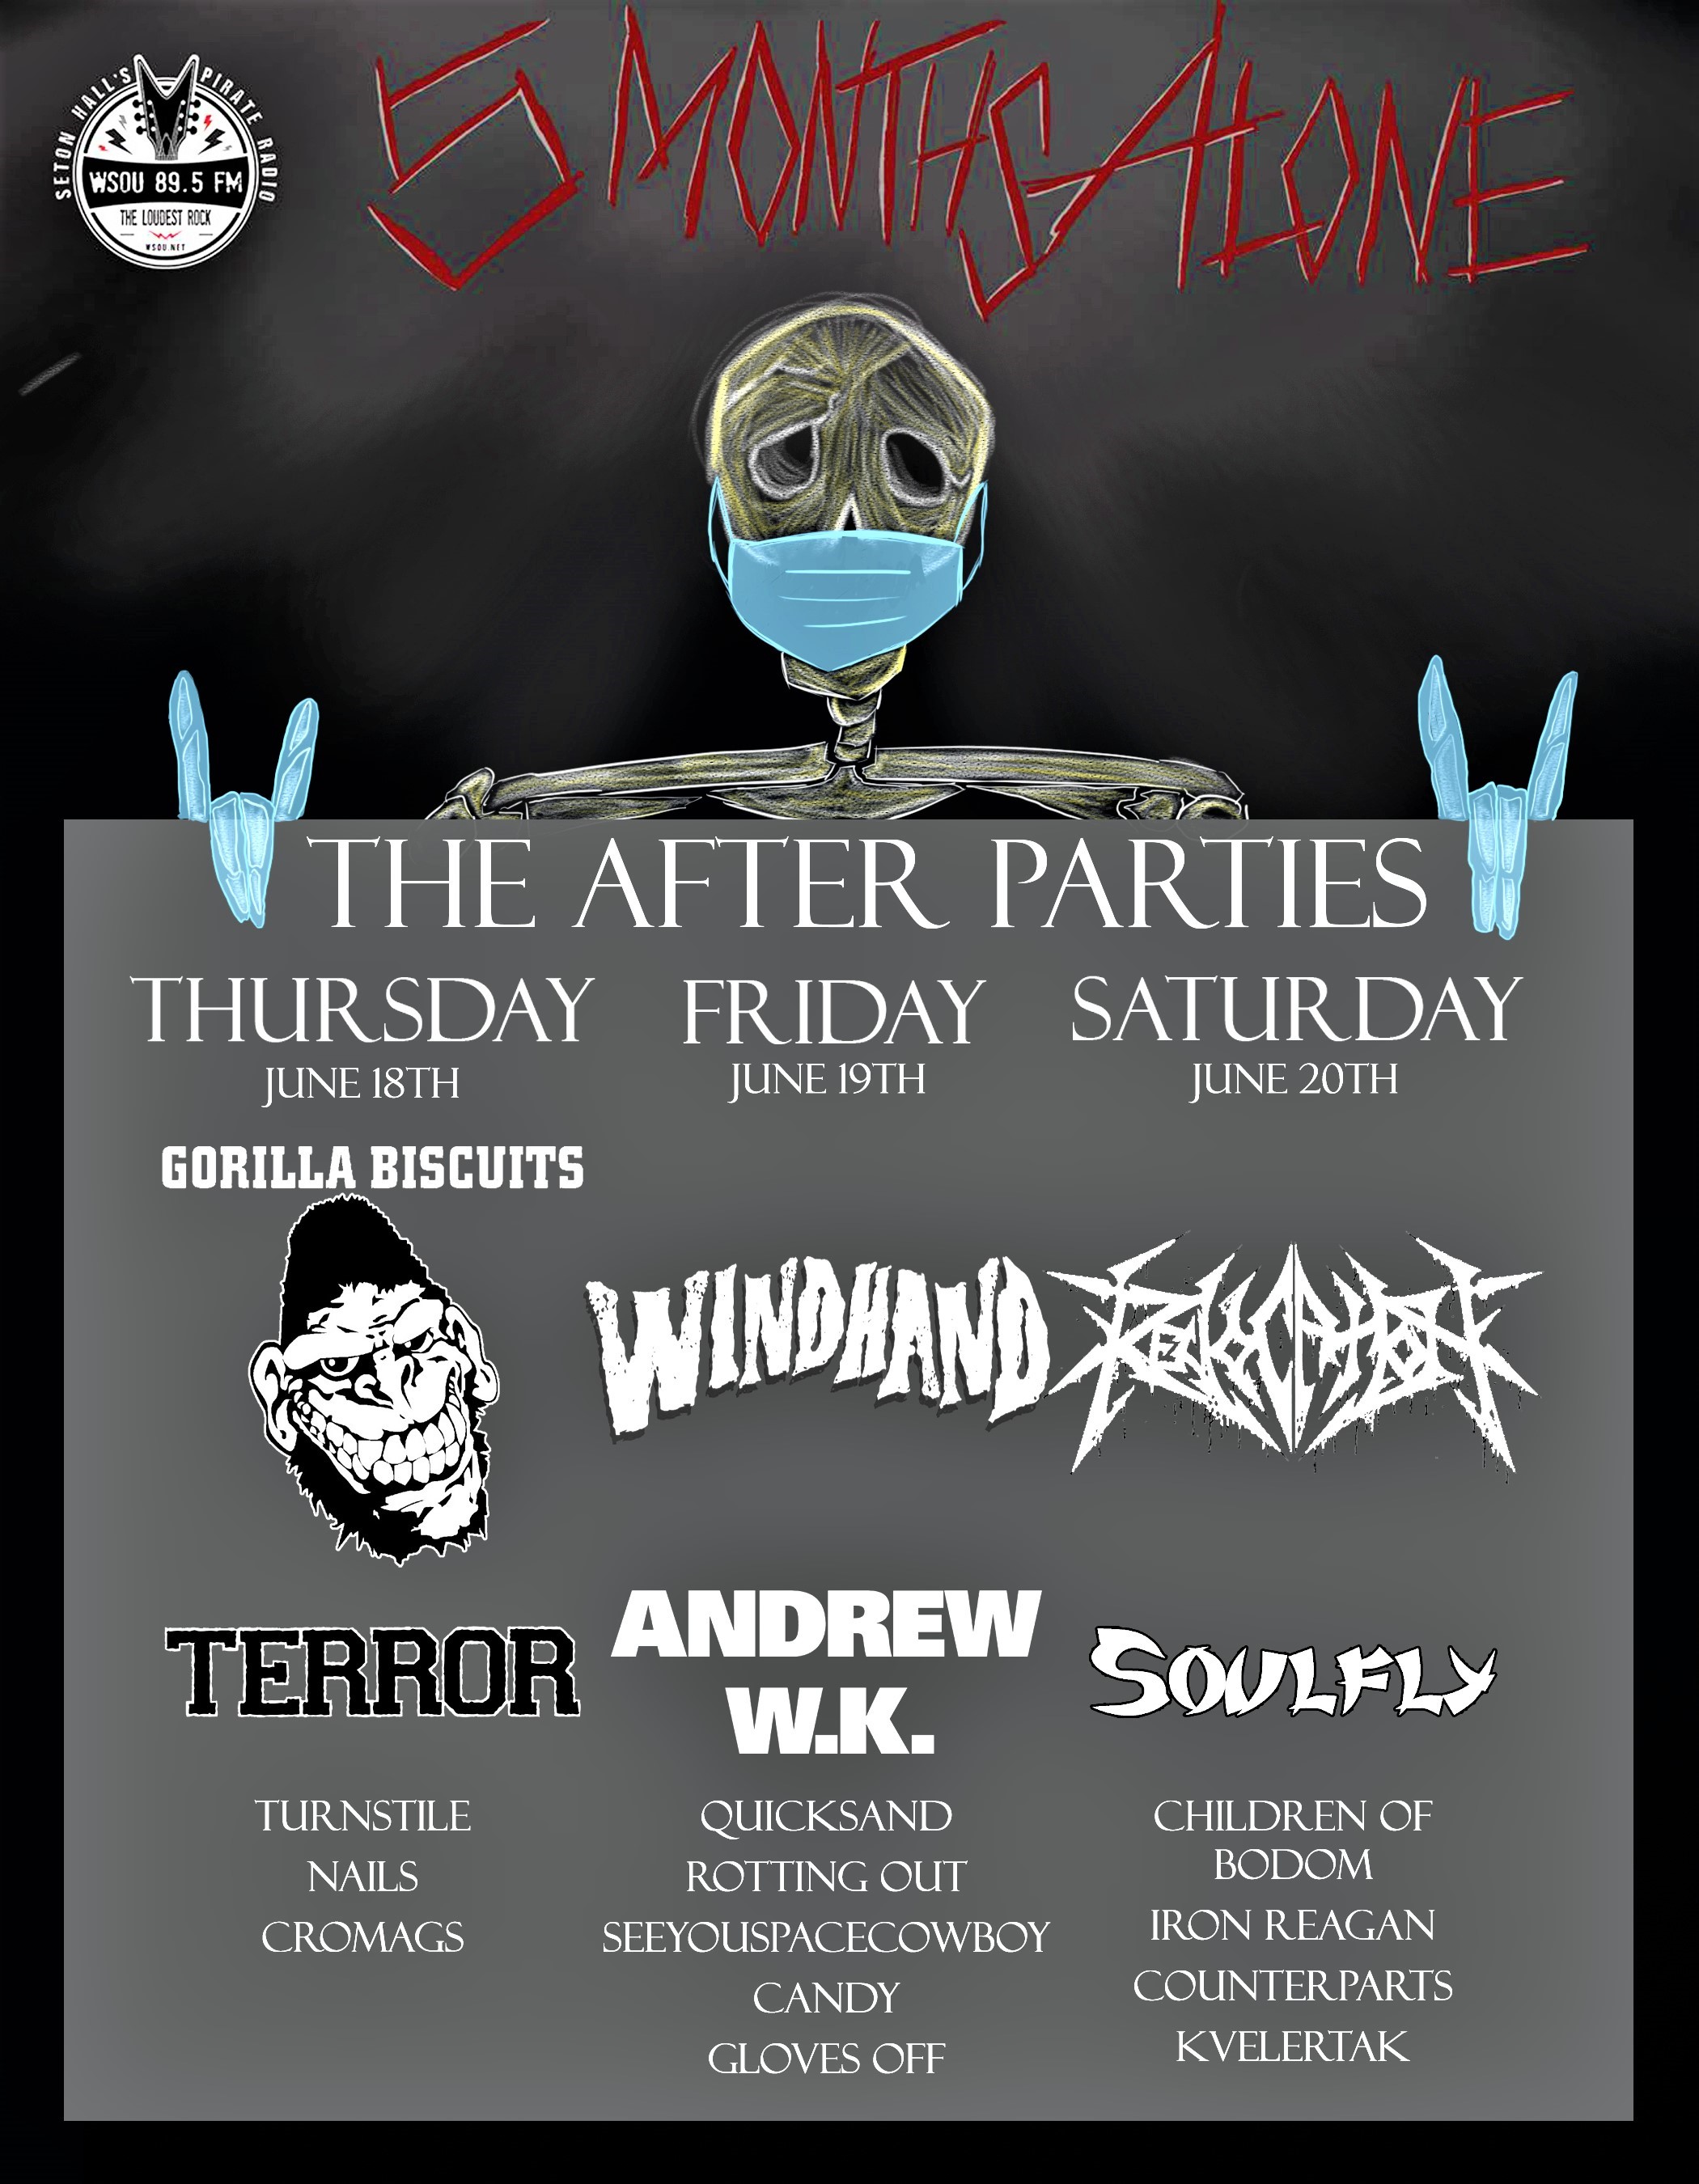 THE AFTER PARTIES THURSDAY JUNE 18TH Gorilla Biscuits, Terror, Turnstile, Nails and Cromags FRIDAY JUNE 19TH Windhand, Andrew W.K., Quicksand, Rotting Out, Seeyouspacecowboy, Candy, Gloves Off, SATURDAY JUNE 20TH Soulfly, Children of Bodom, Iron and more!